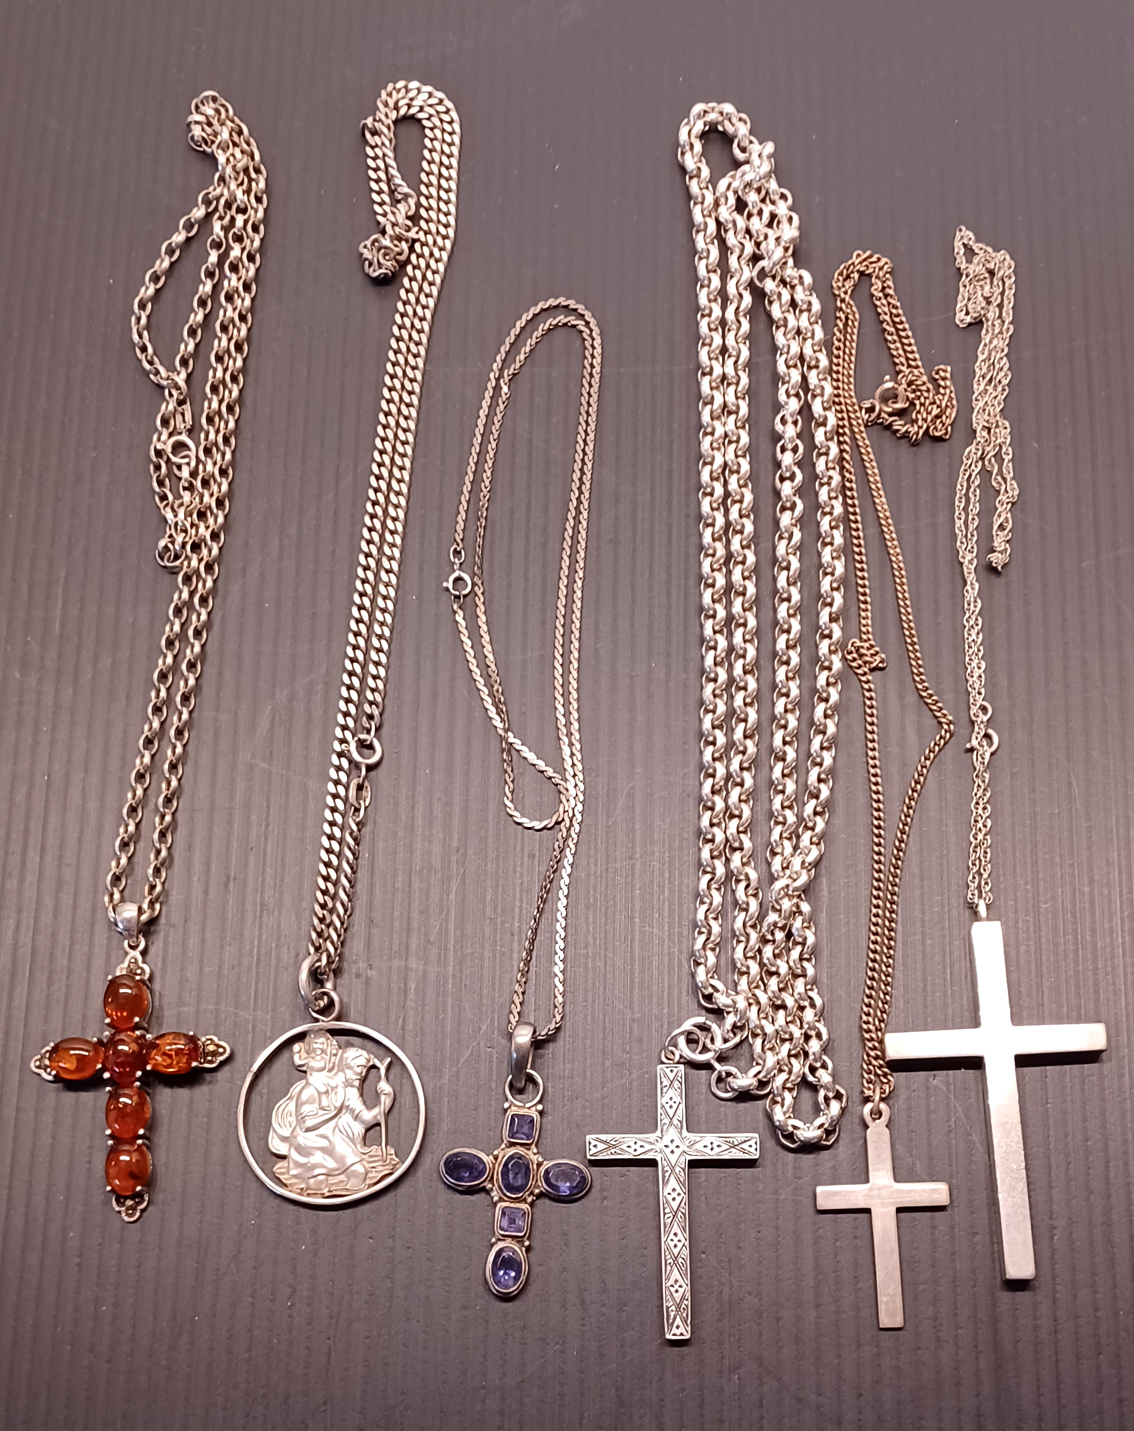 6 SILVER NECKLACE 139.5g, A ST CHRISTOPHER, 5 CRUCIFIXES, INC. AMBER, AMETHYST. LARGEST 60MM X 35MM 